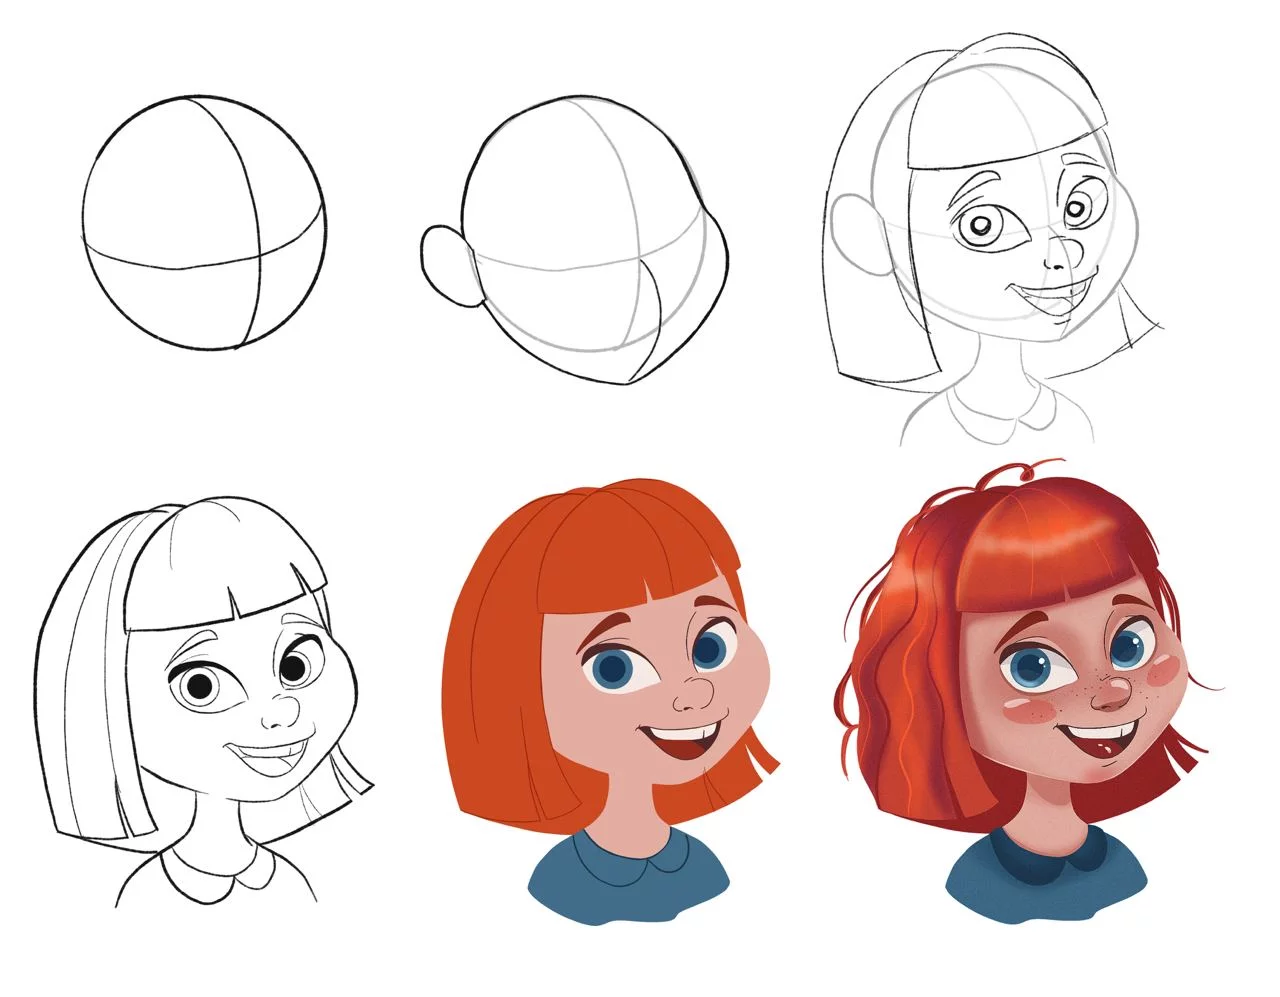 How to draw a human in cartoon style. Step by step instruction (8 steps)